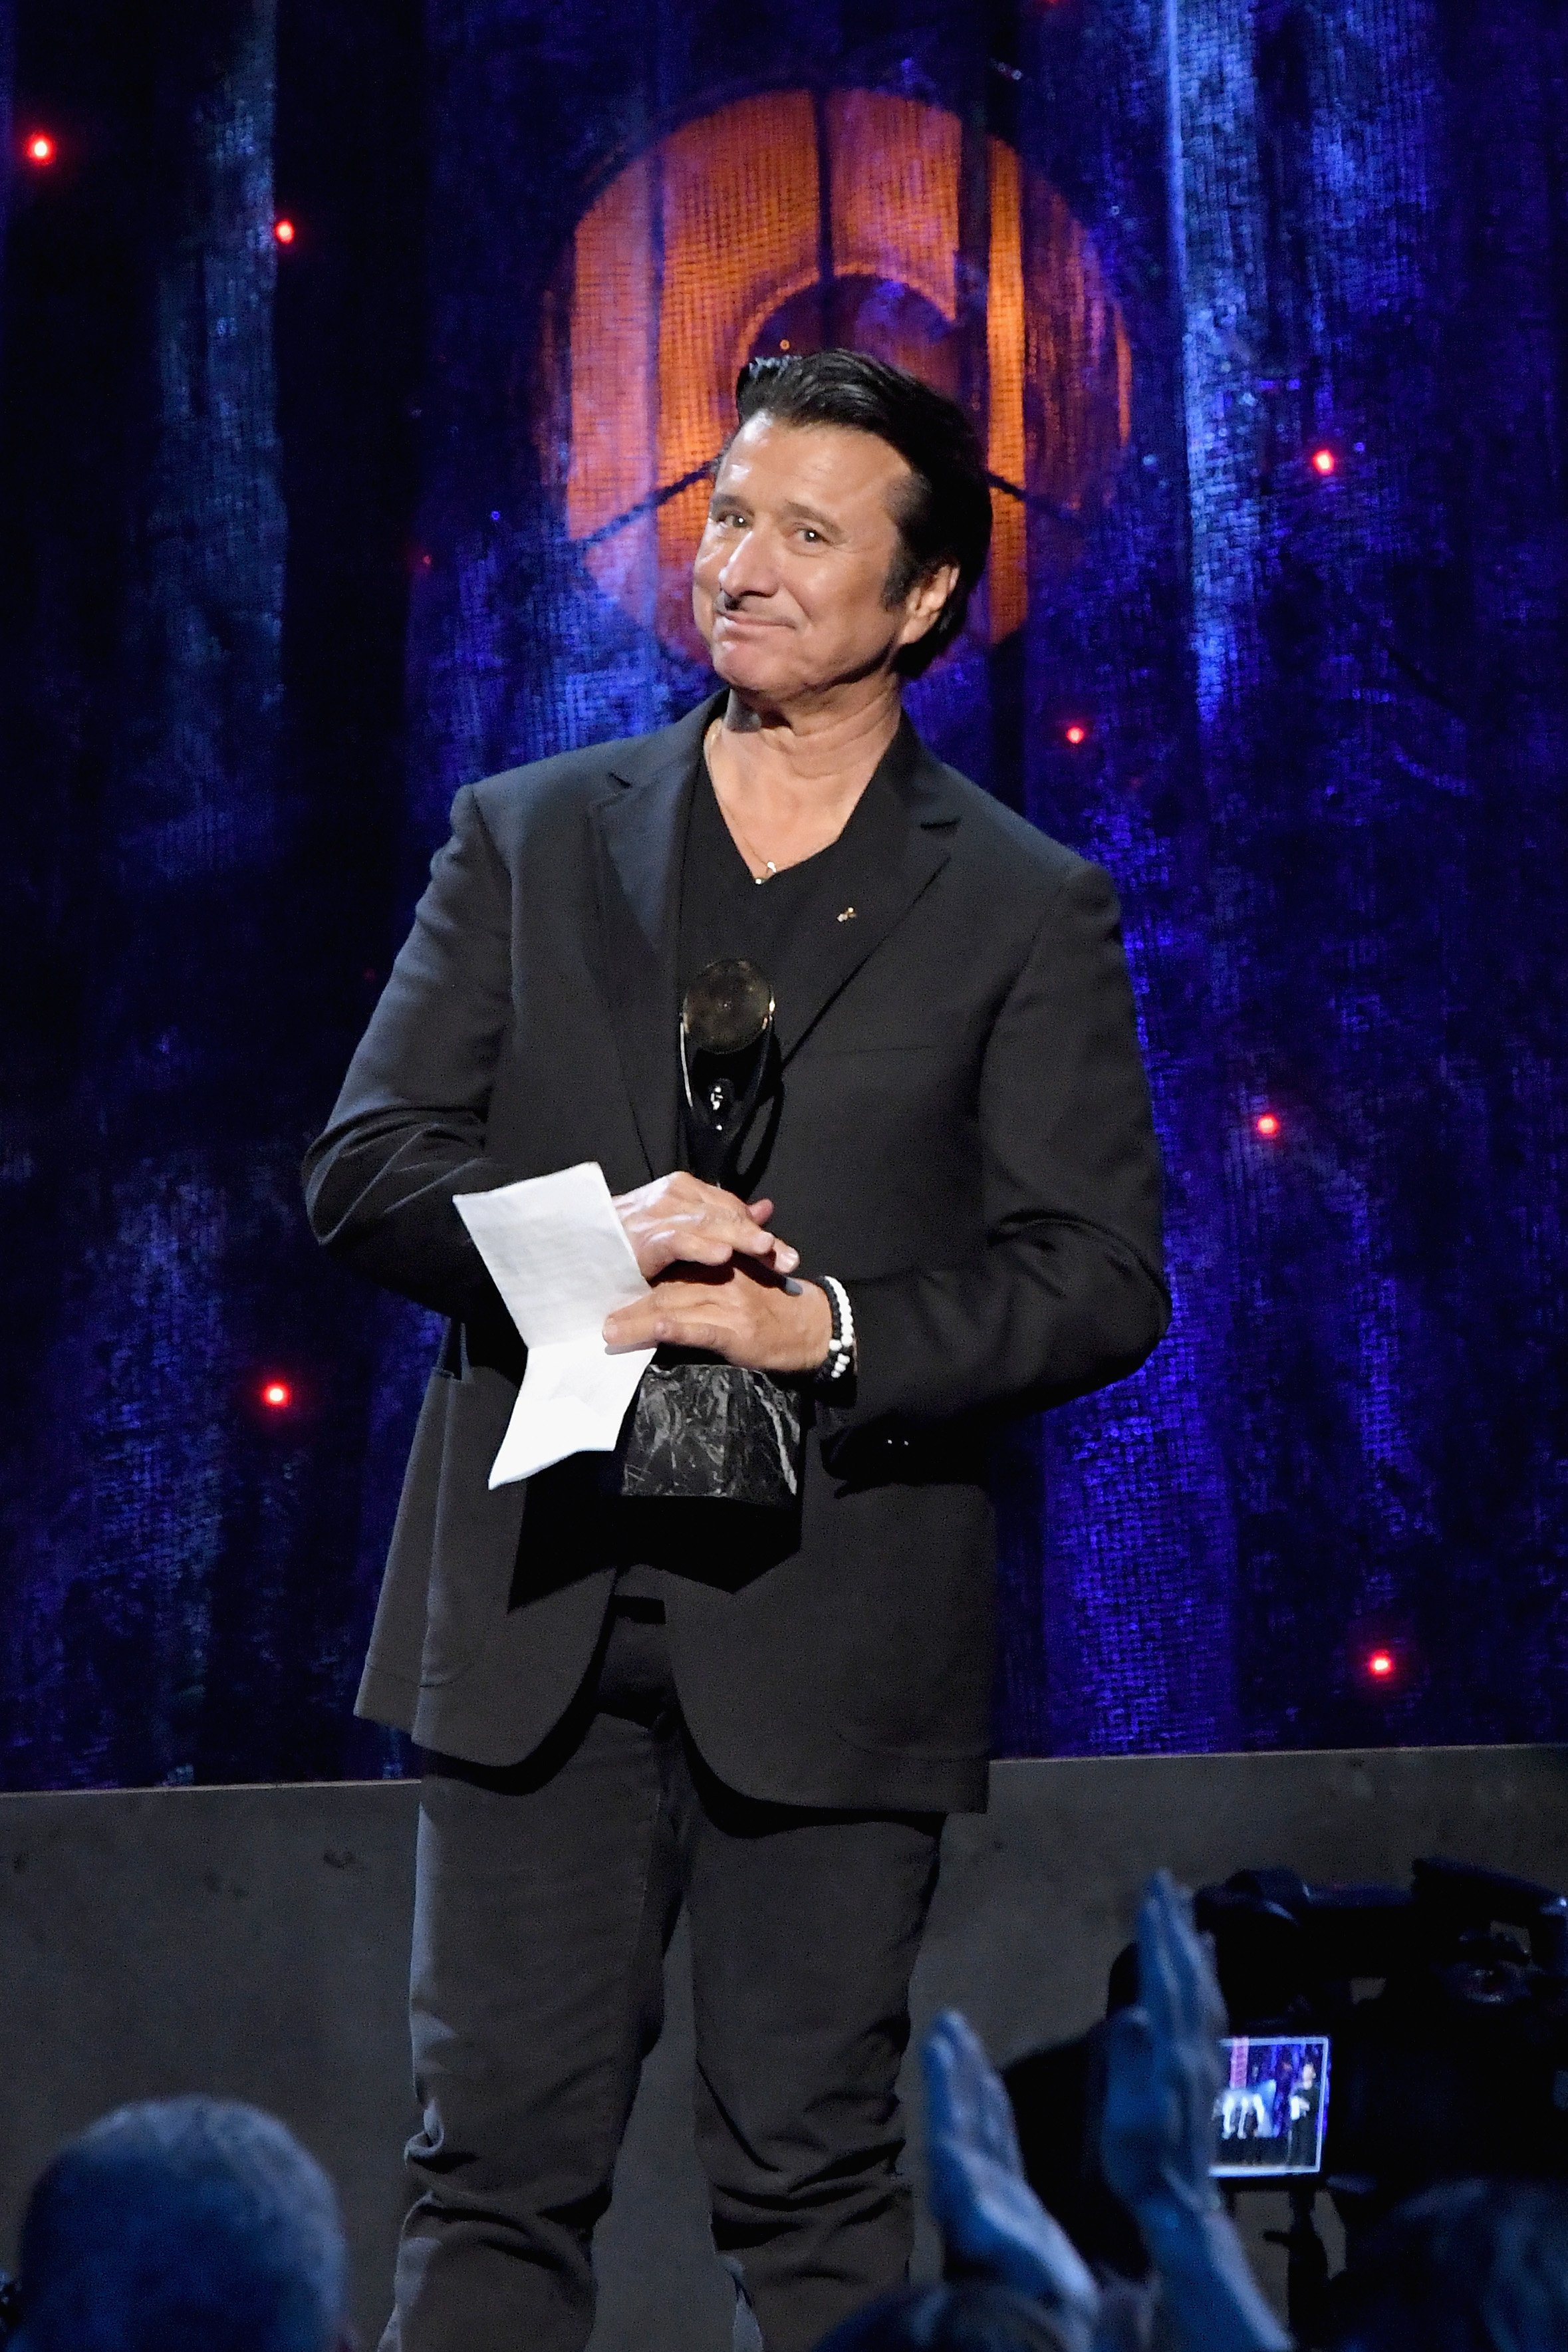 Steve Perry bei der Rock & Roll Hall Of Fame Induction Zeremonie, 2017 | Quelle: Getty Images